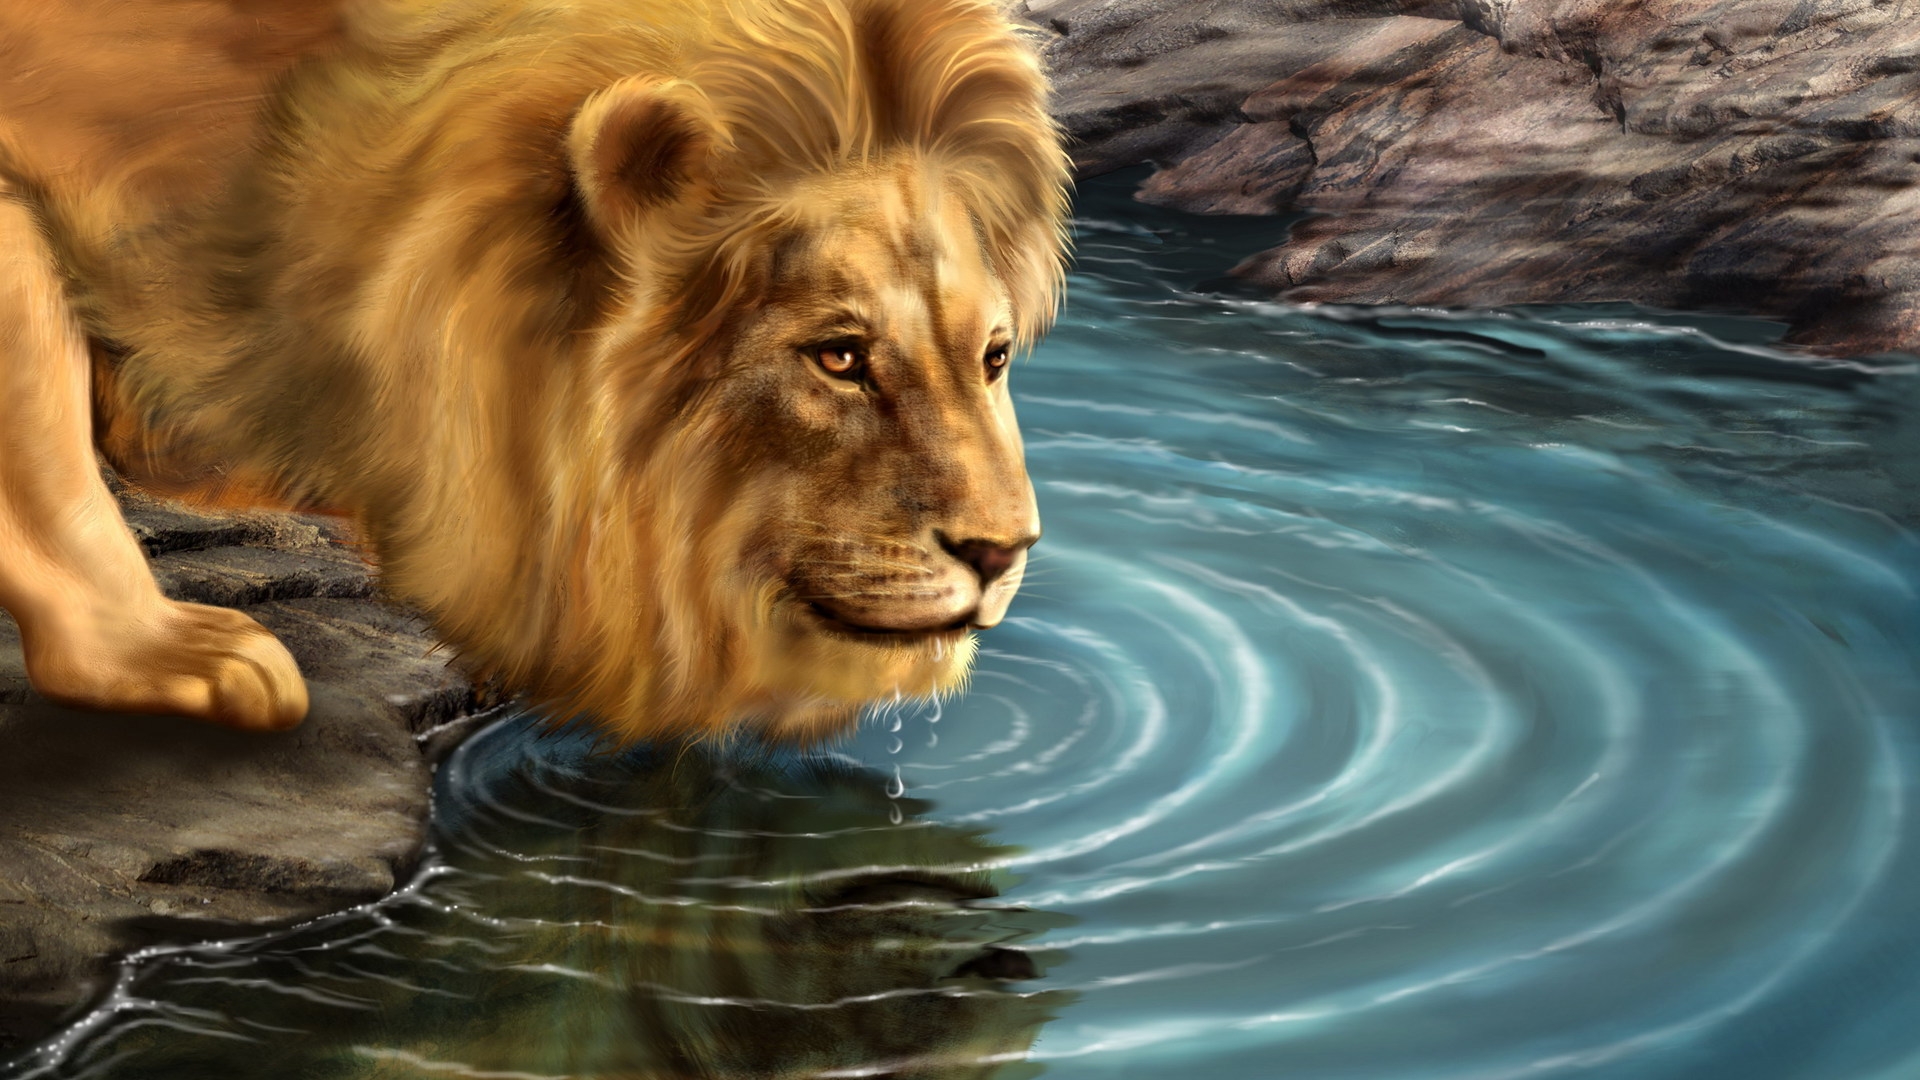 Lion Drinking Water for 1920 x 1080 HDTV 1080p resolution